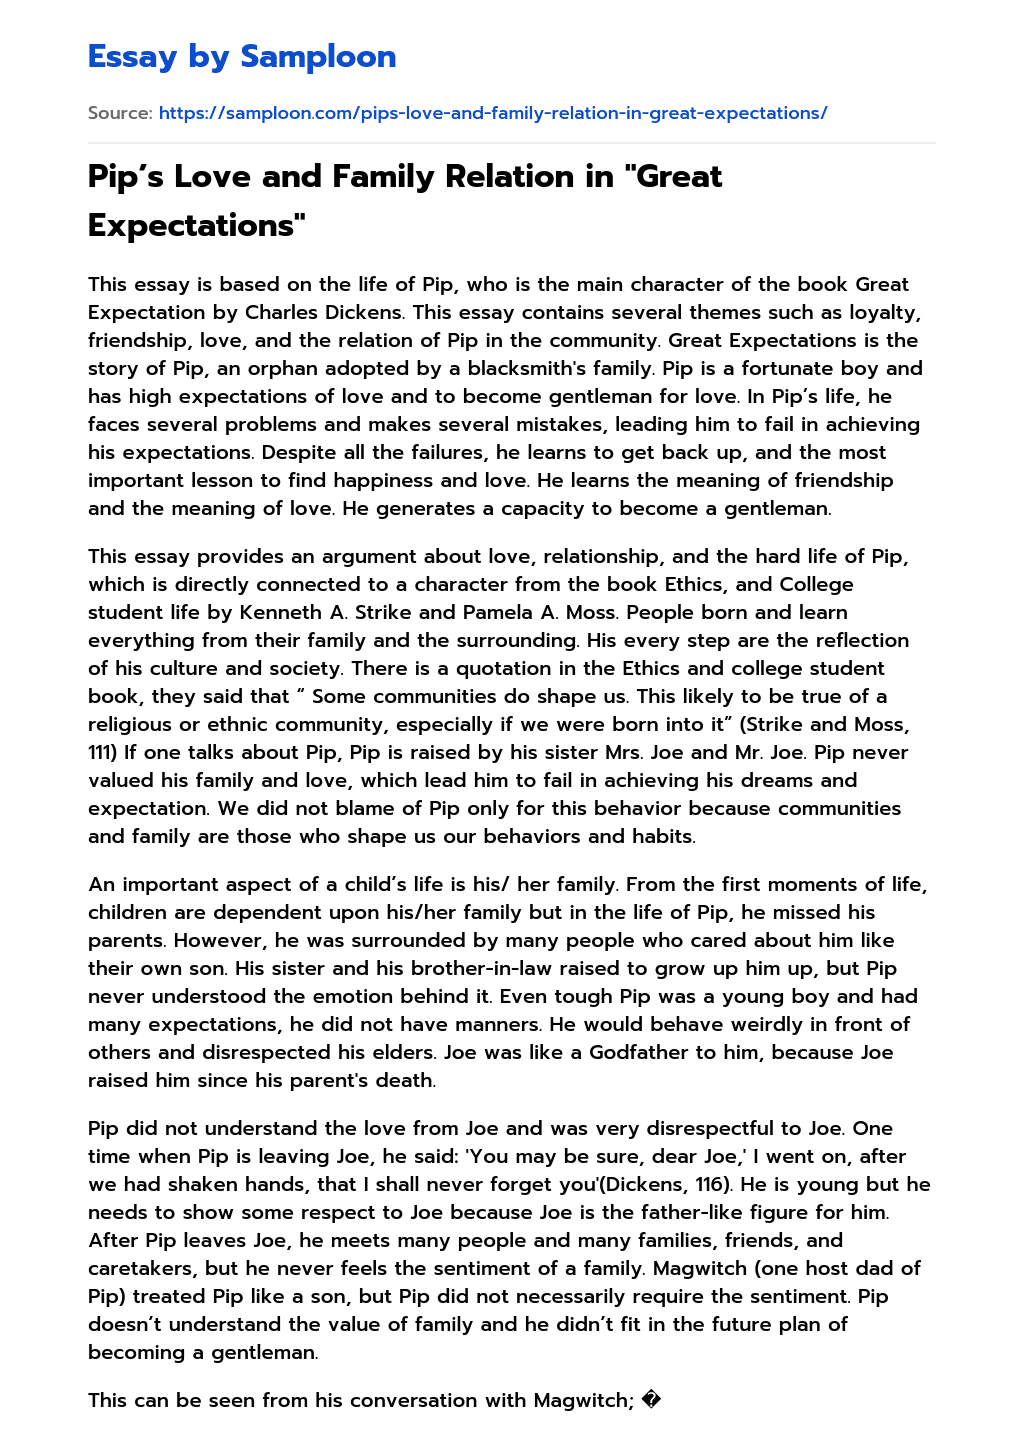 Pip’s Love and Family Relation in “Great Expectations” Summary essay